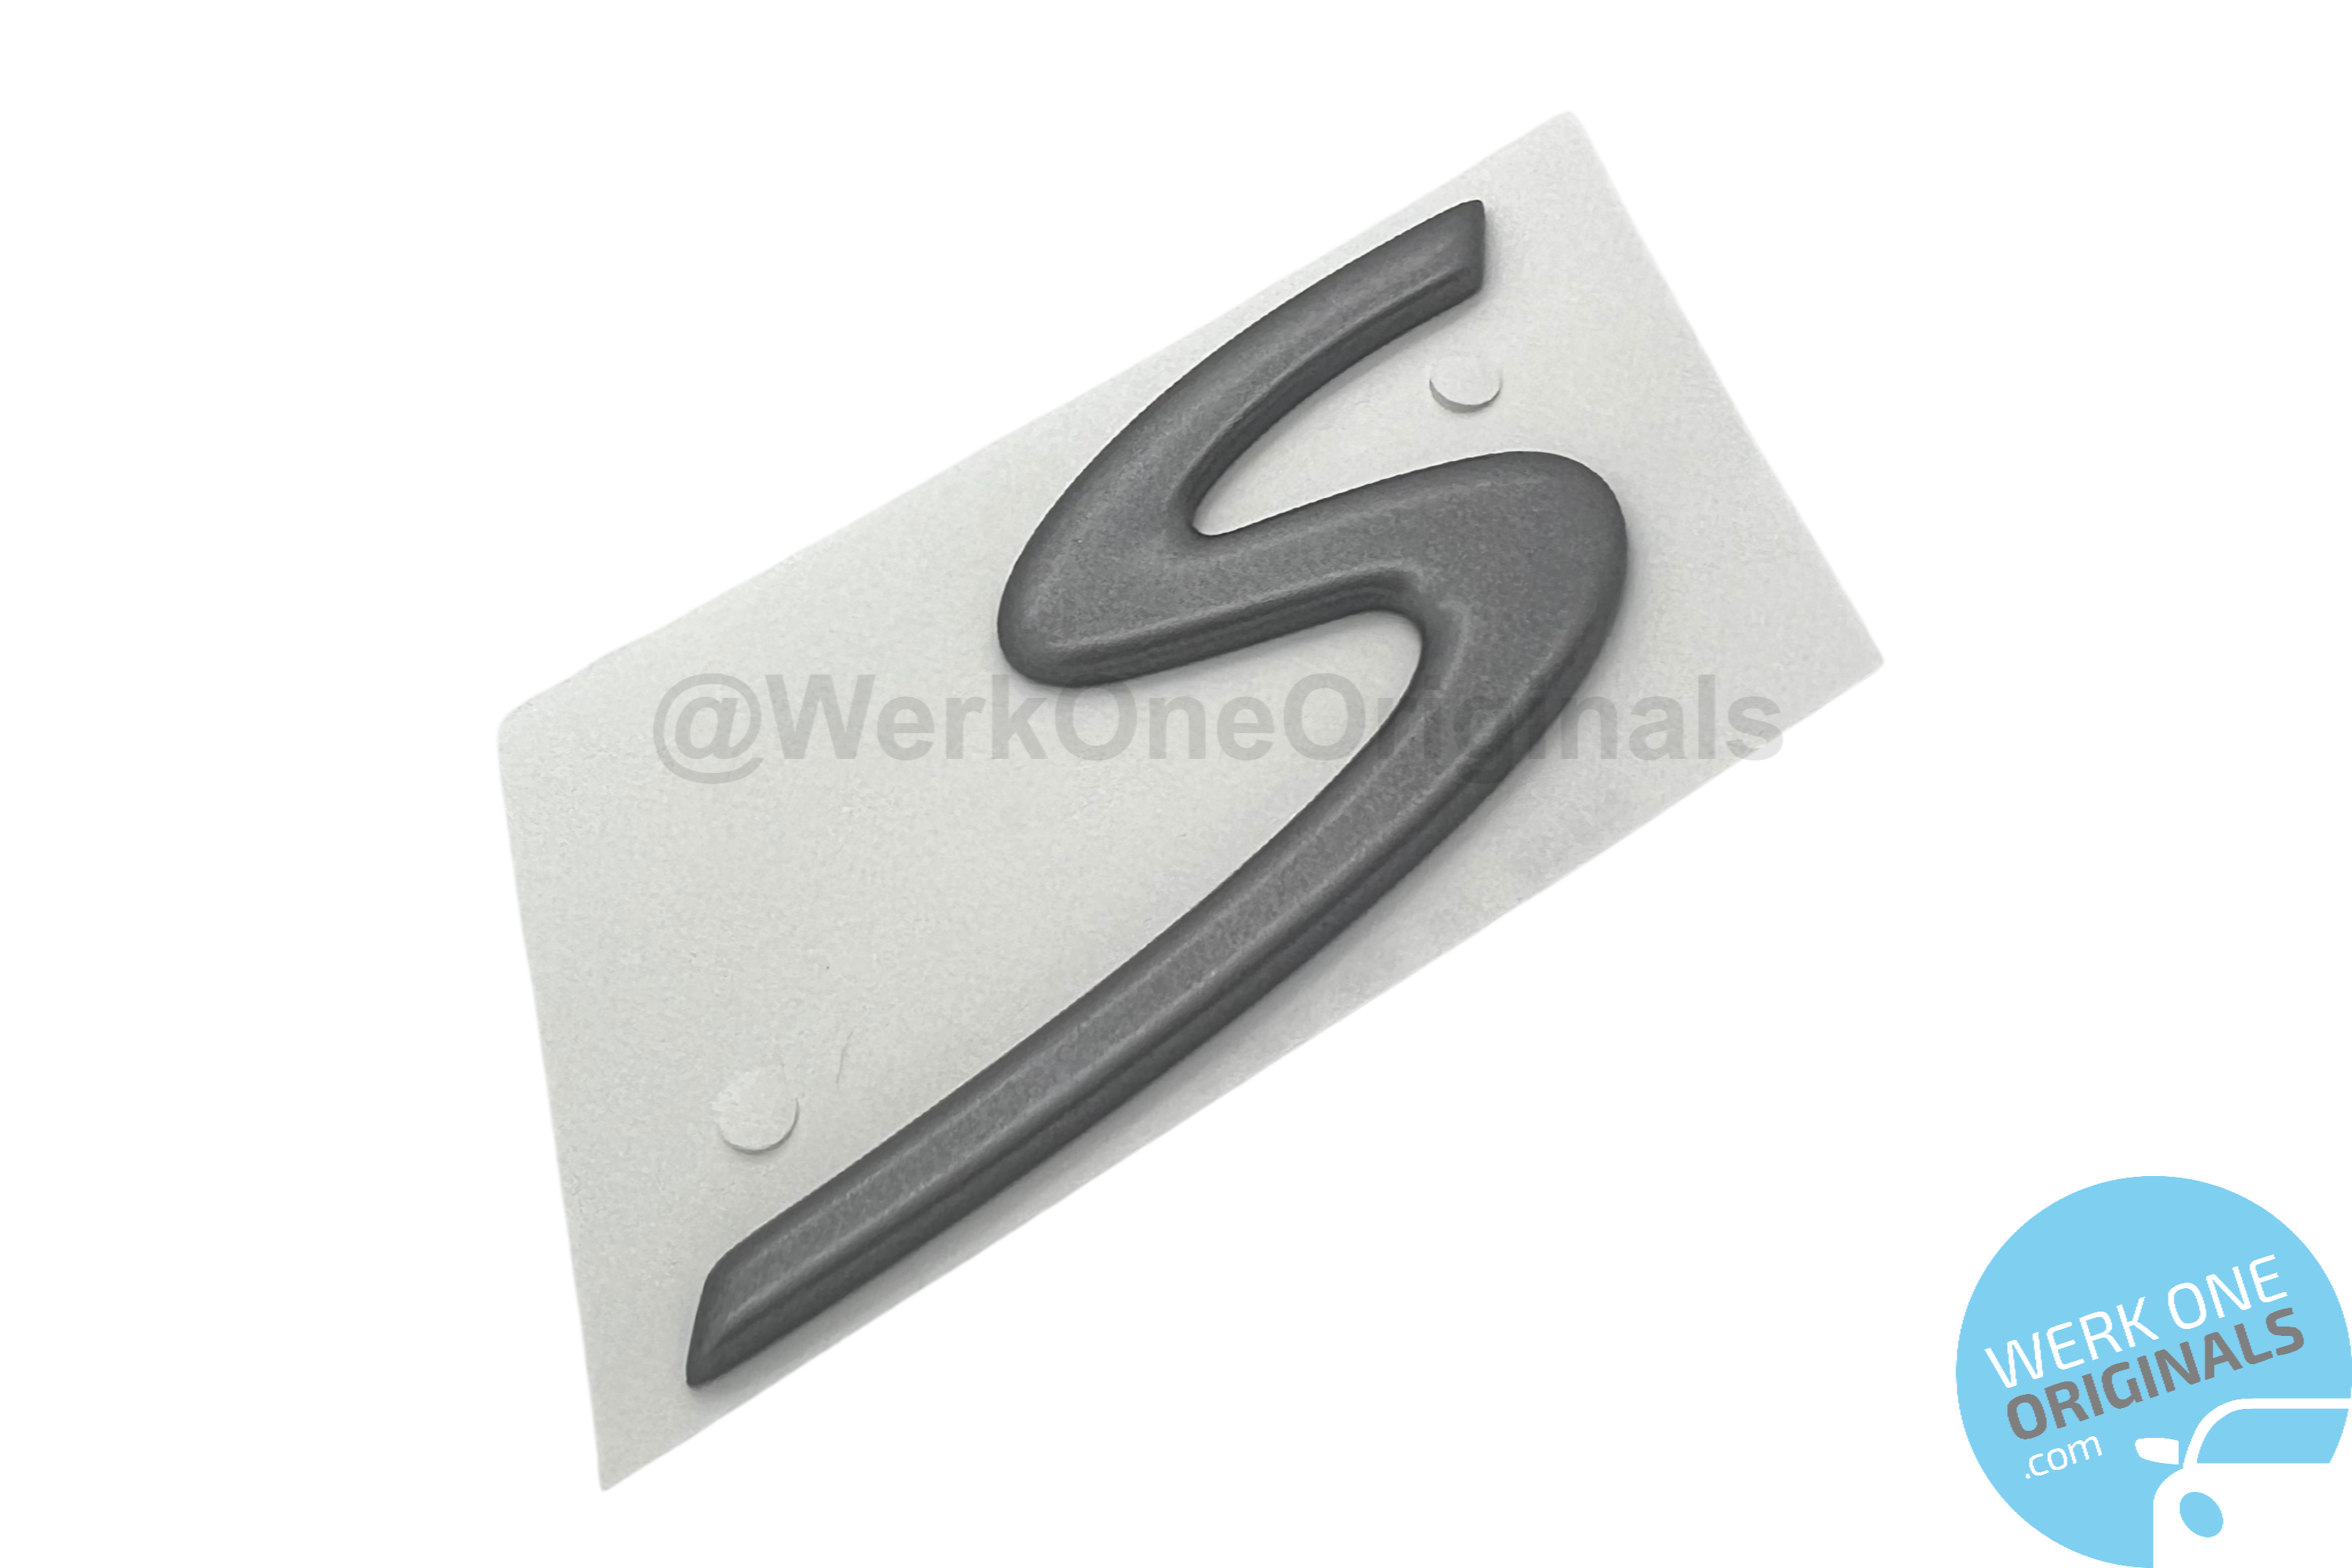 Official Porsche 'Boxster S' Rear Badge in Titanium Grey for Boxster S Type 987 Models